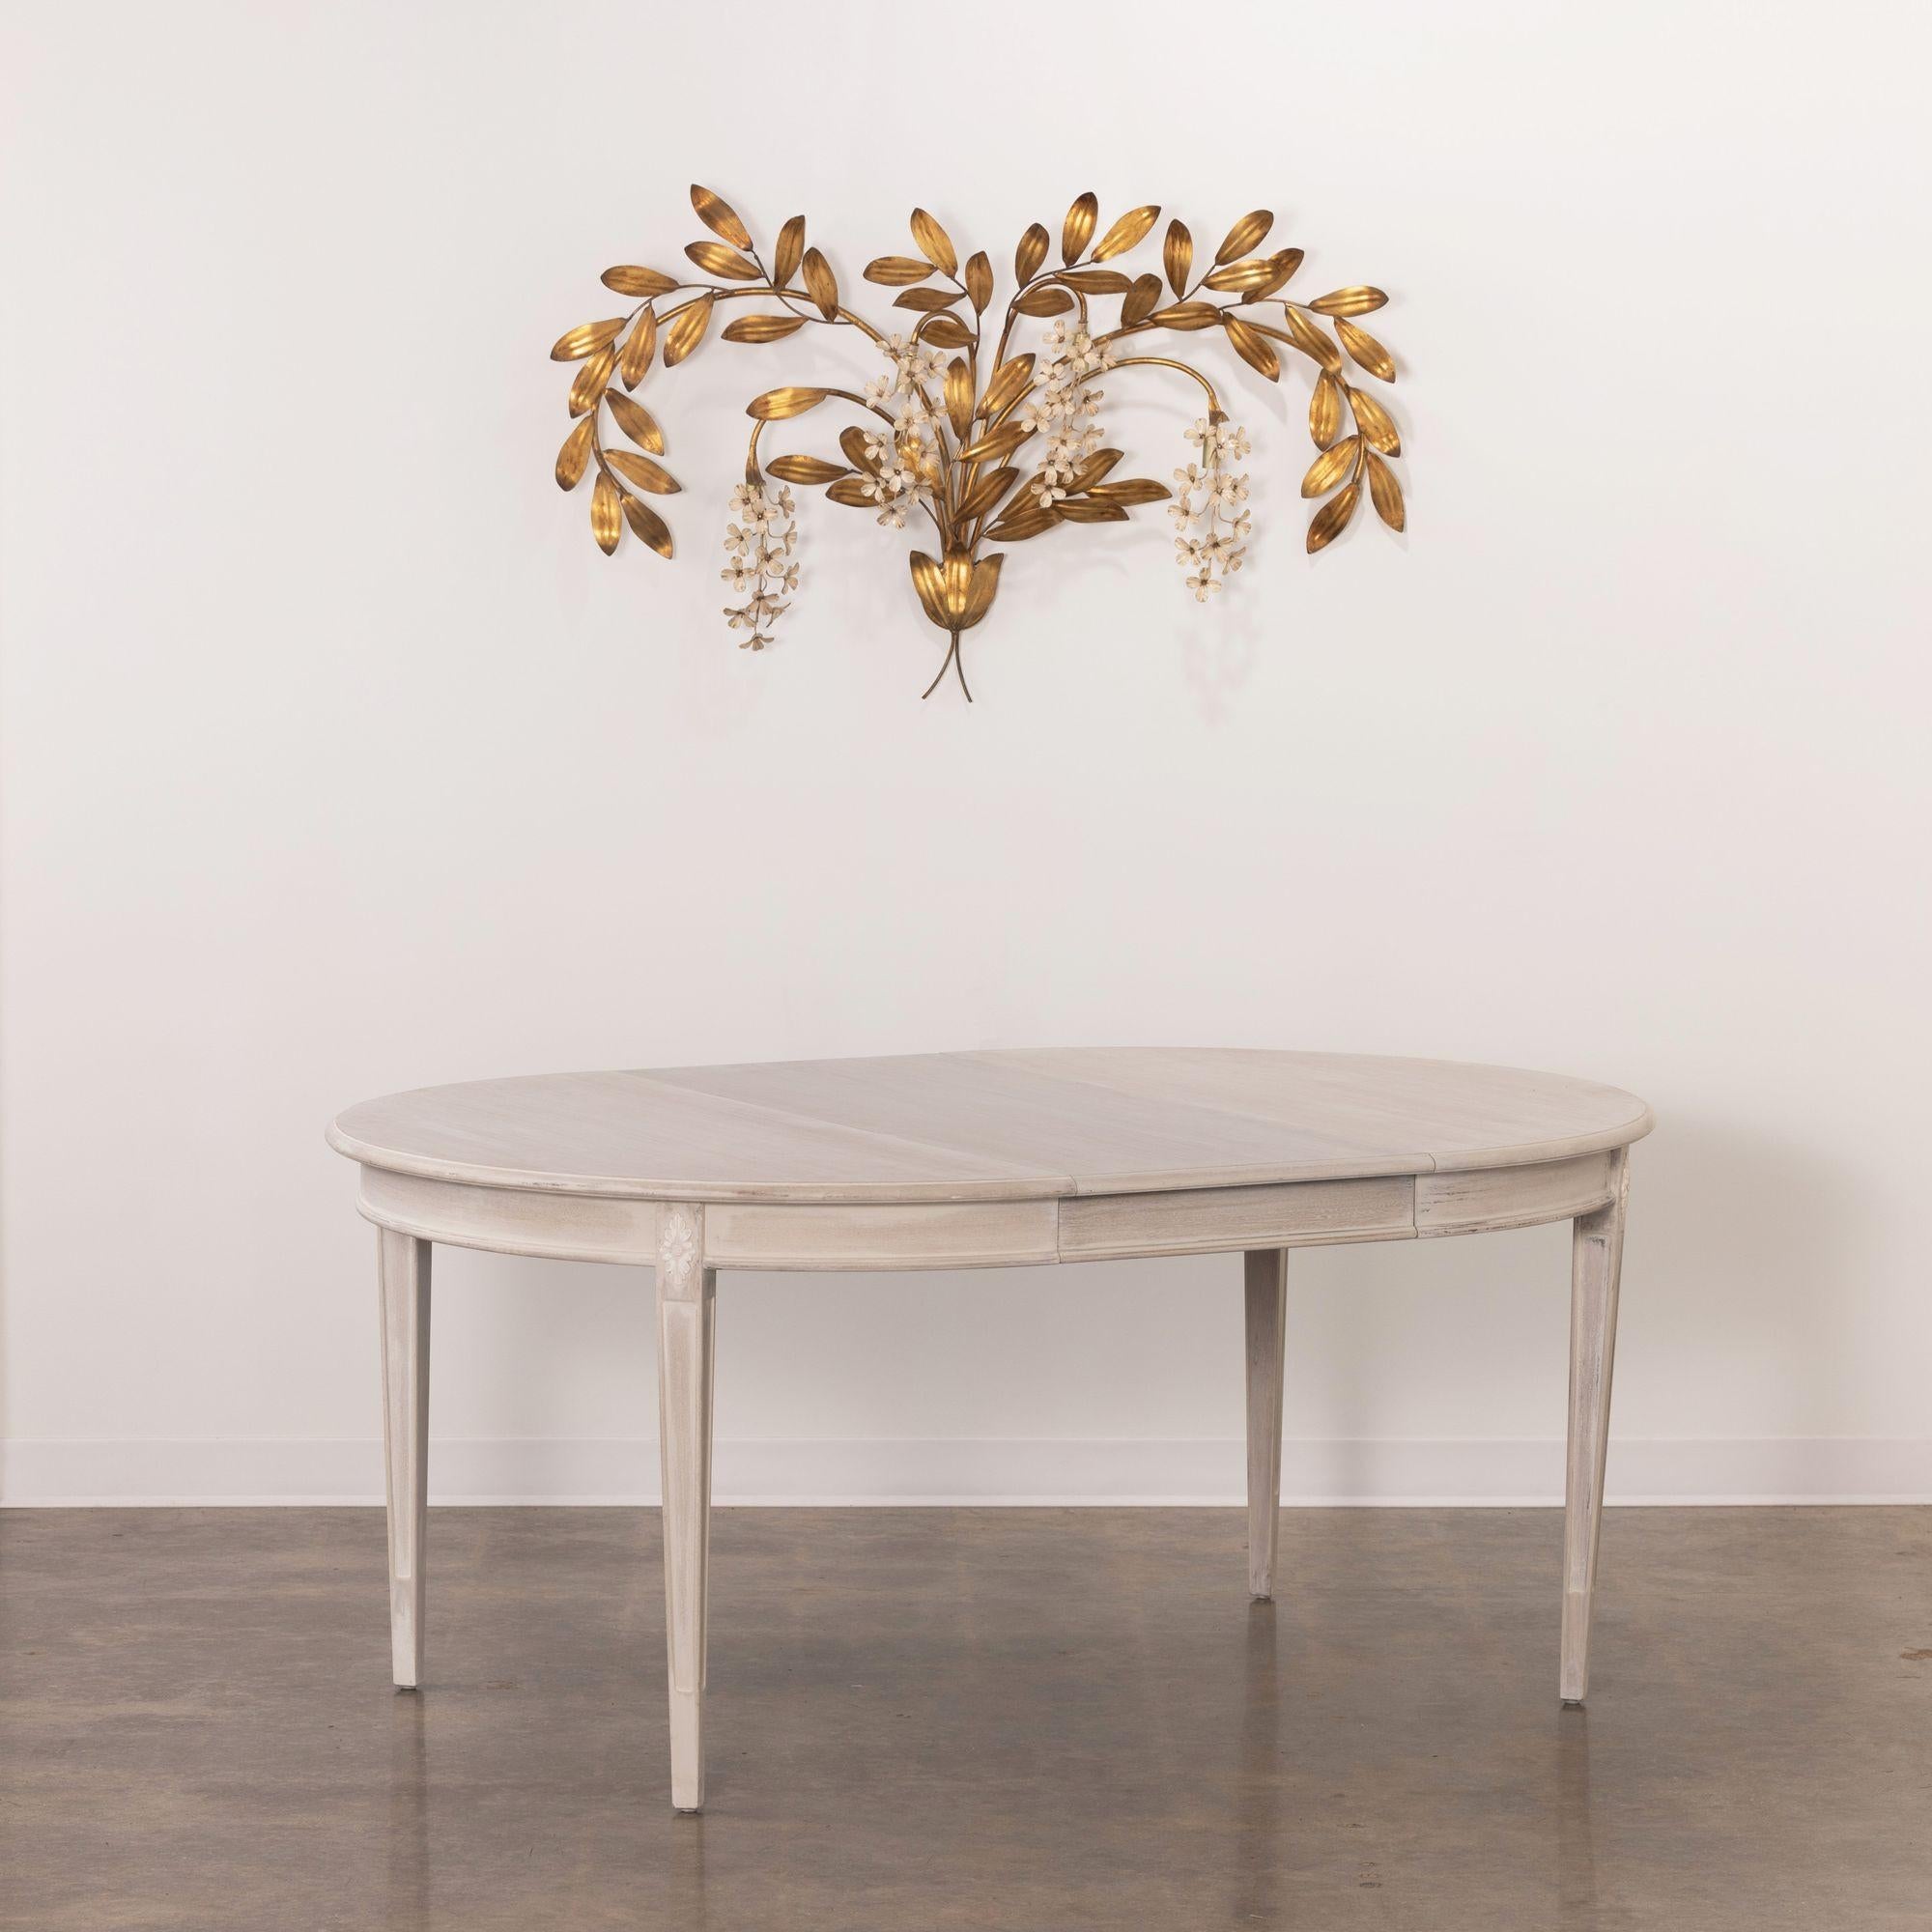 19th c. Swedish Gustavian Bleached and Glazed Extension Table with Three Leaves For Sale 7